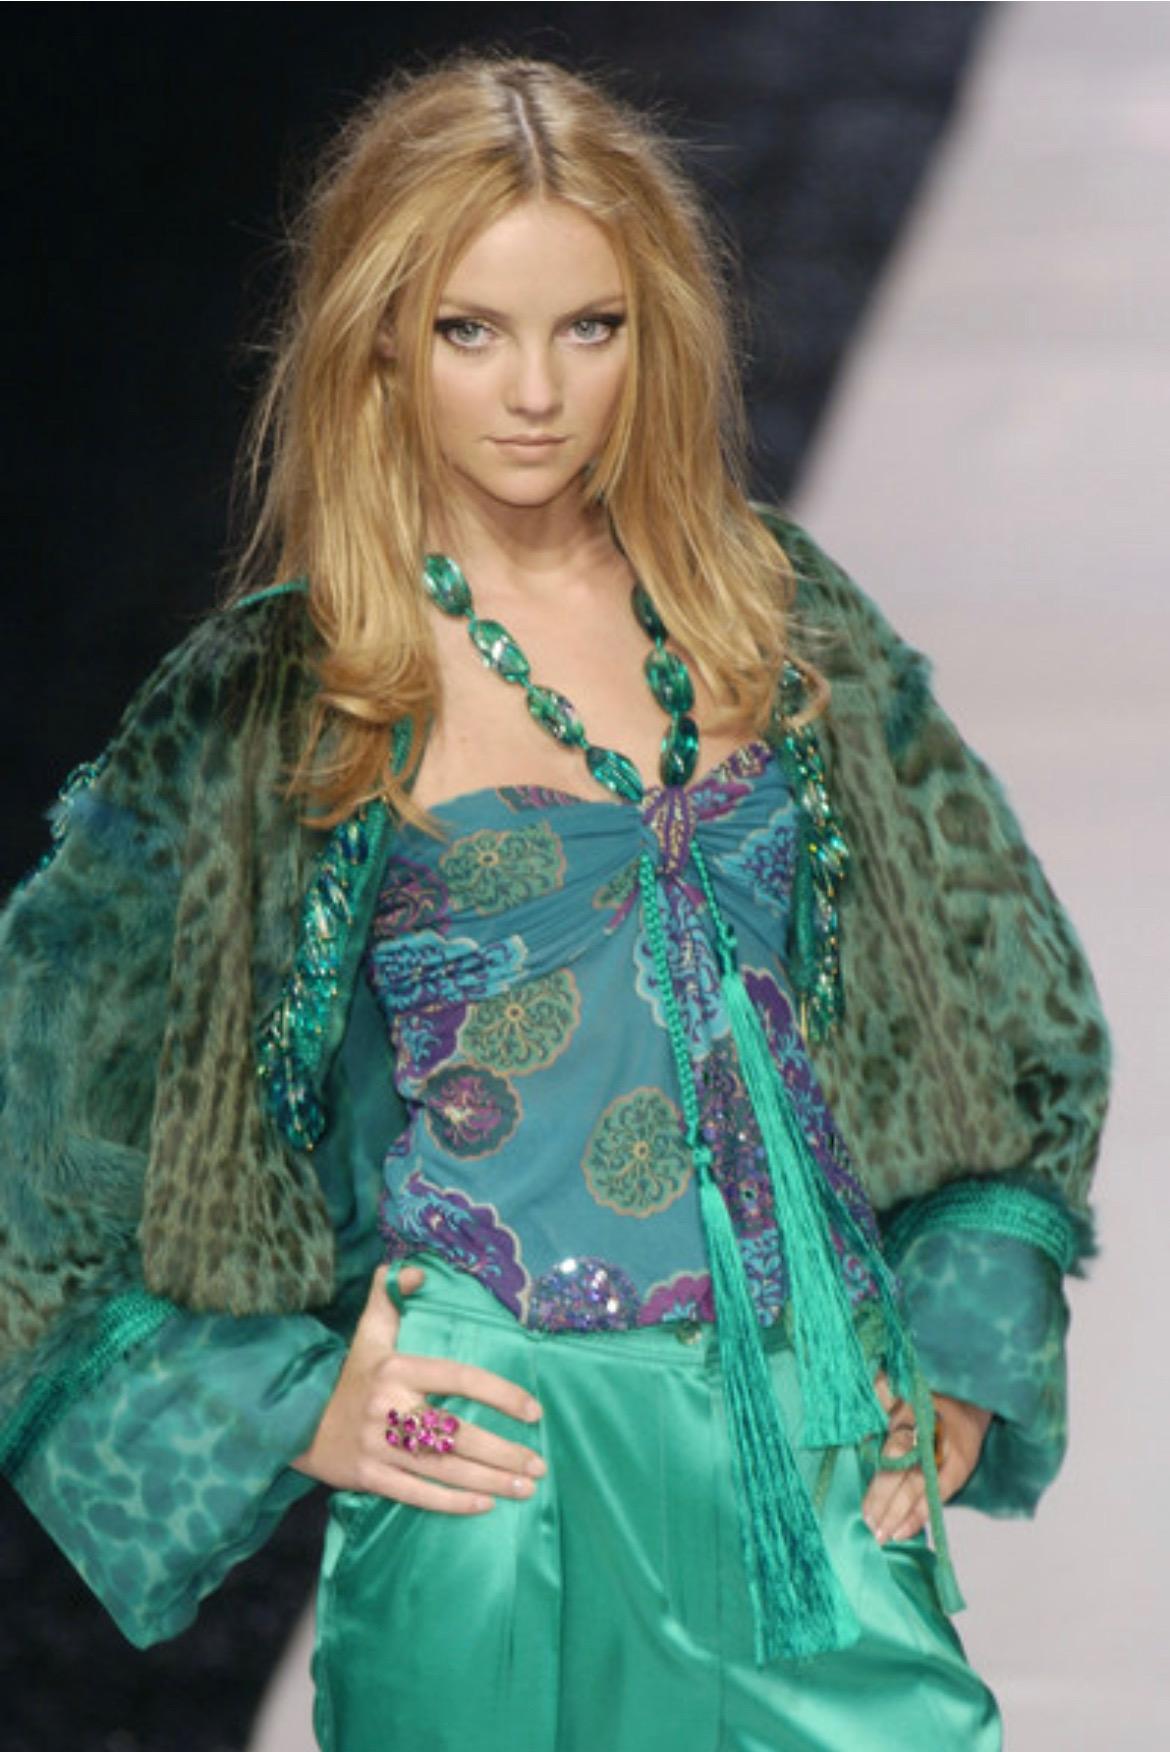 TheRealList presents: a gorgeous teal halter neck Emanuel Ungaro top, designed by Giambattista Valli. From the Spring/Summer 2005 collection, this top a version of this top debuted on the season's runway as part of look 38 modeled by Heather Marks.